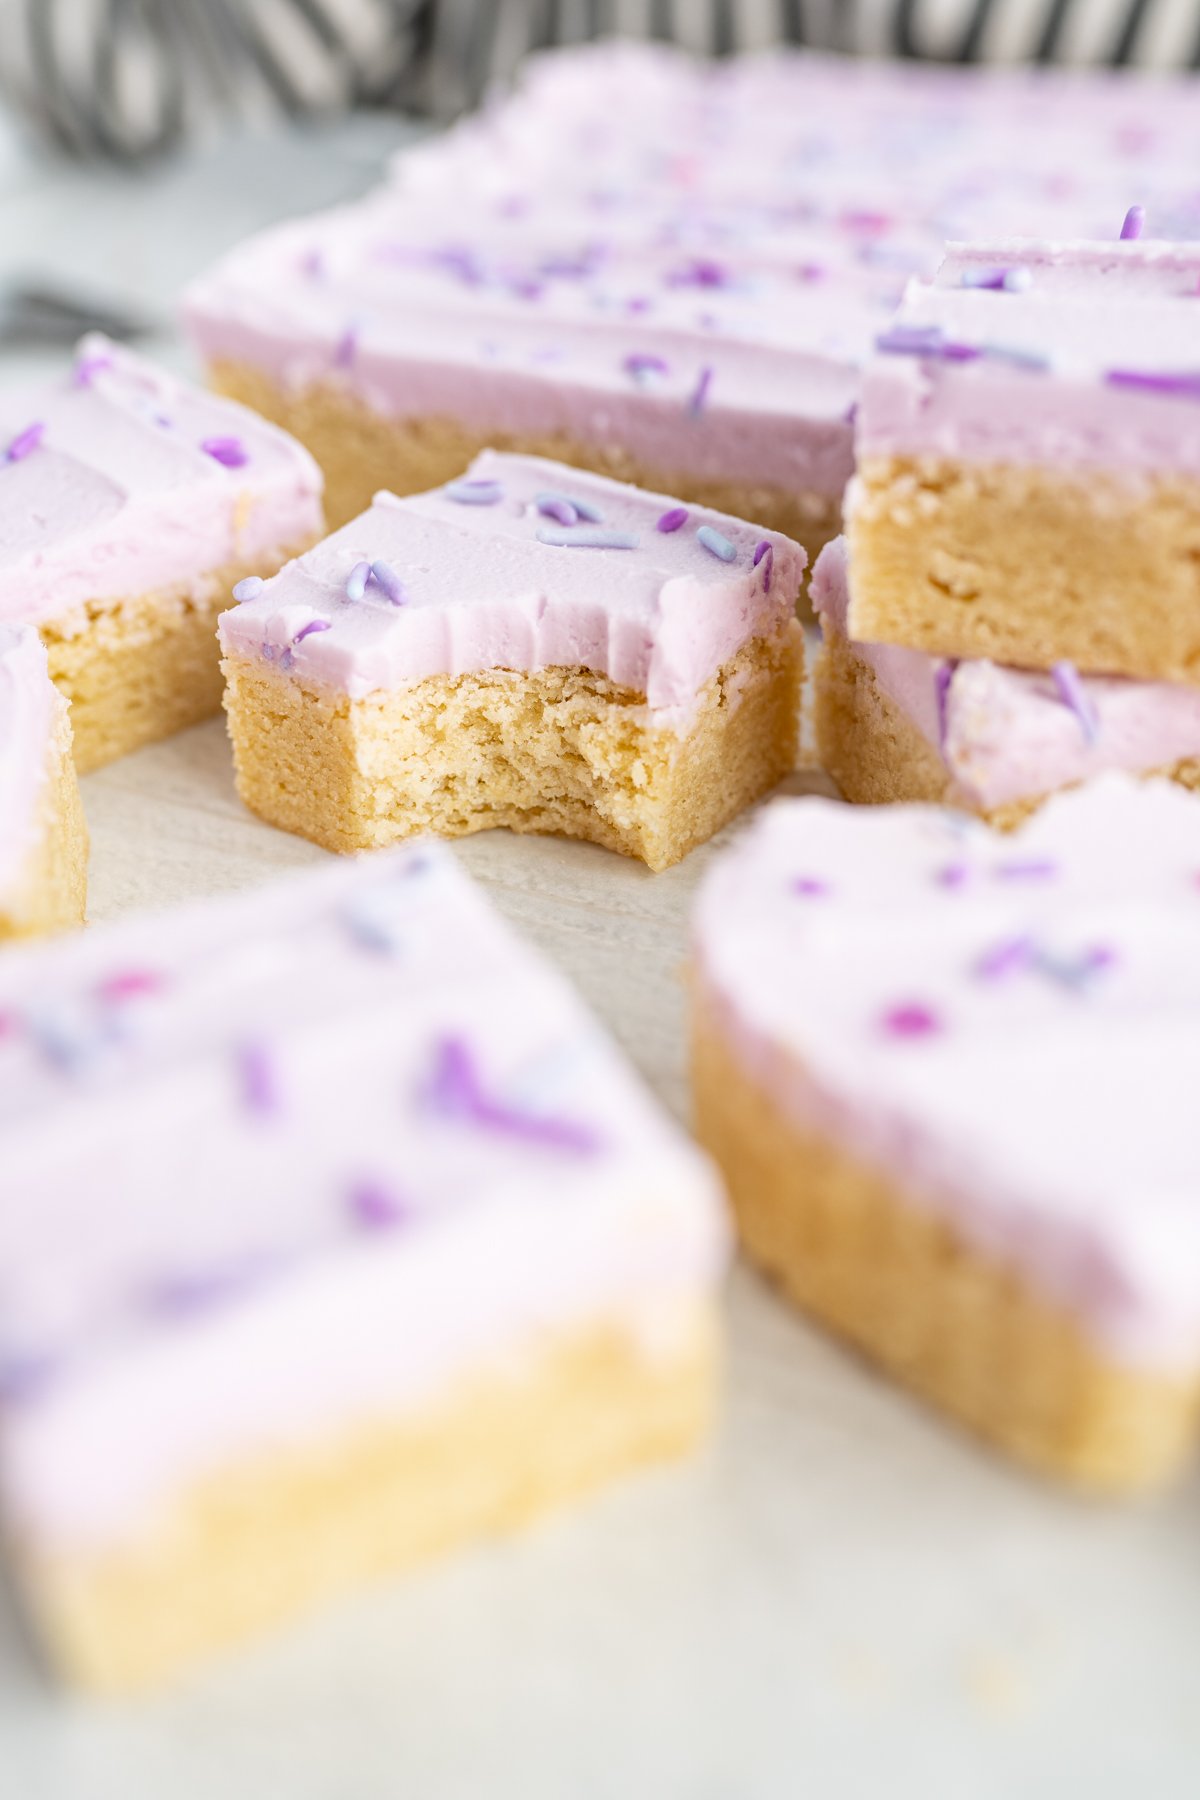 A pile of sugar cookie bars frosted with purple frosting and topped with sprinkles. One bar has a bite taken out of it. 